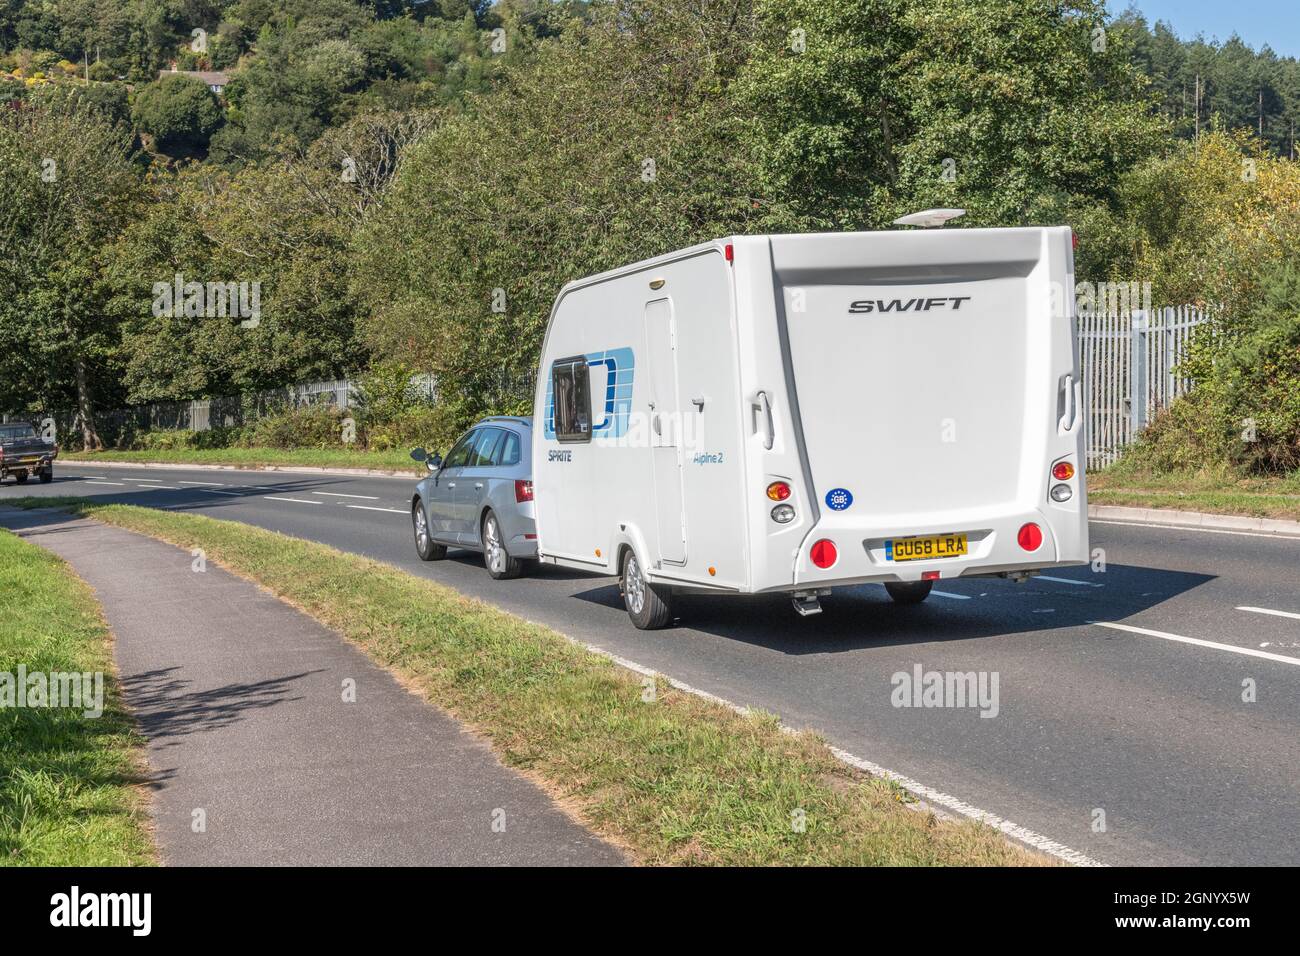 Auto-Sleeper Broadway caravan travelling downhill on country road in Cornwall. For UK caravans, campervans, staycations in UK, alternative holidays. Stock Photo